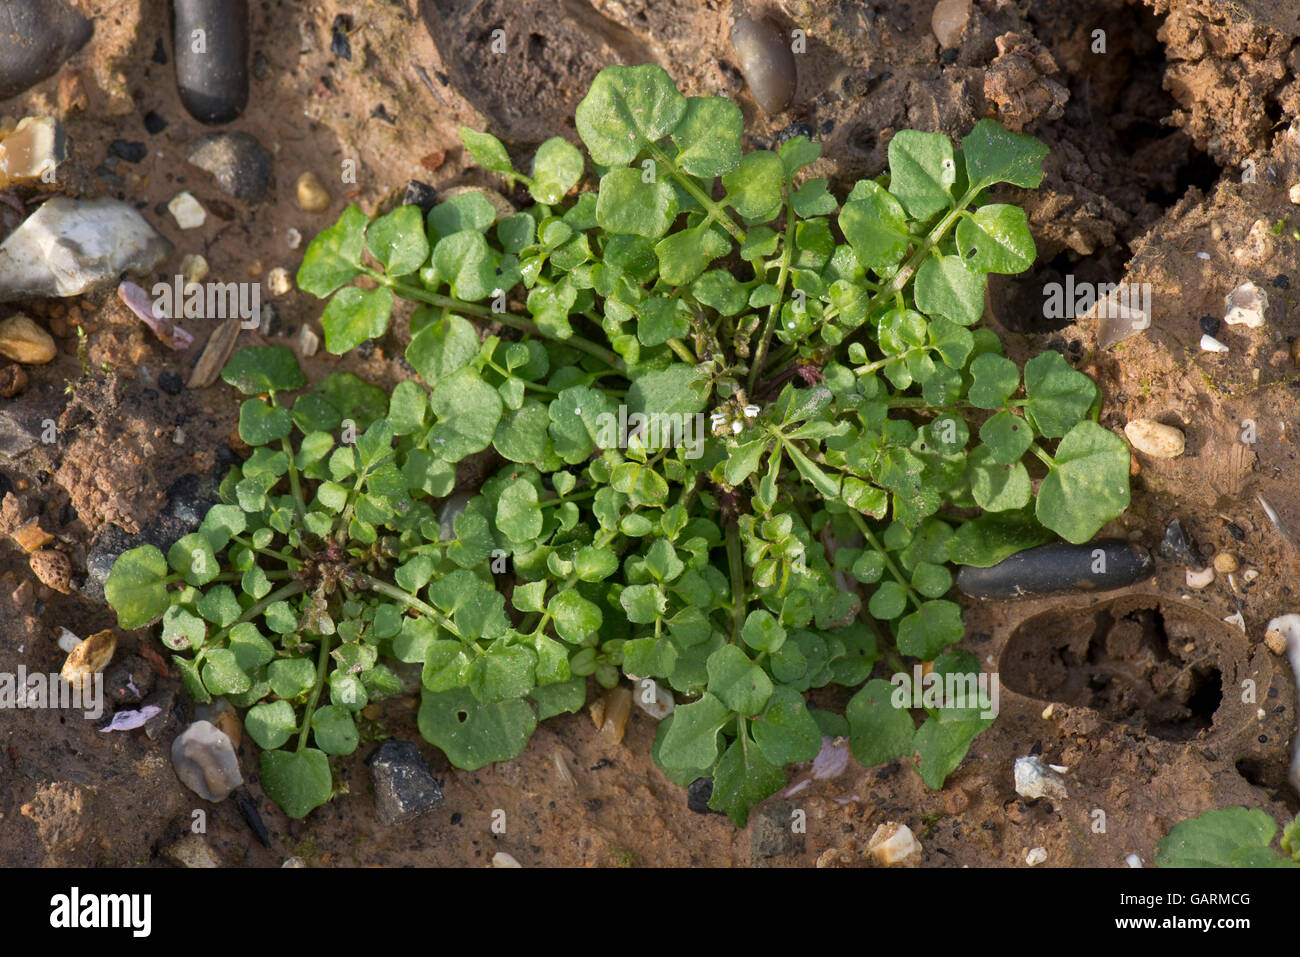 A hairy bittercress, Cardamine  hirsuta,  plant leaf rosette with flower bud, a common garden weed, February Stock Photo